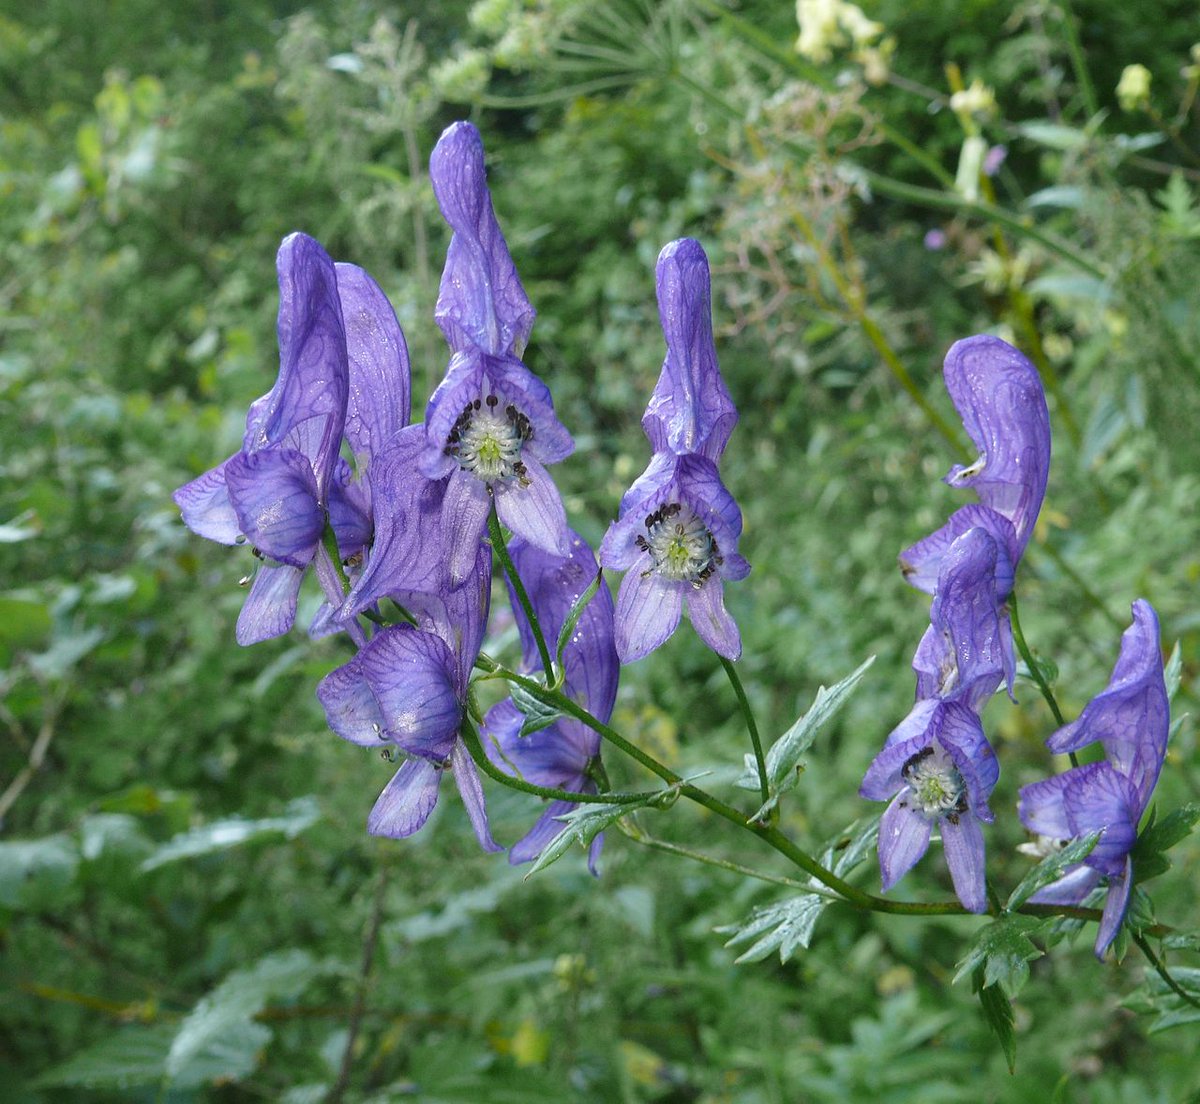 ~Wolfsbane~ Aconitum, also known as aconite, monkshood, wolf's-bane,devil's helmet, queen of poisons, is a genus of over 250 species of flowering plants belonging to the family Ranunculaceae. Most species are extremely poisonous and must be dealt with very carefully.